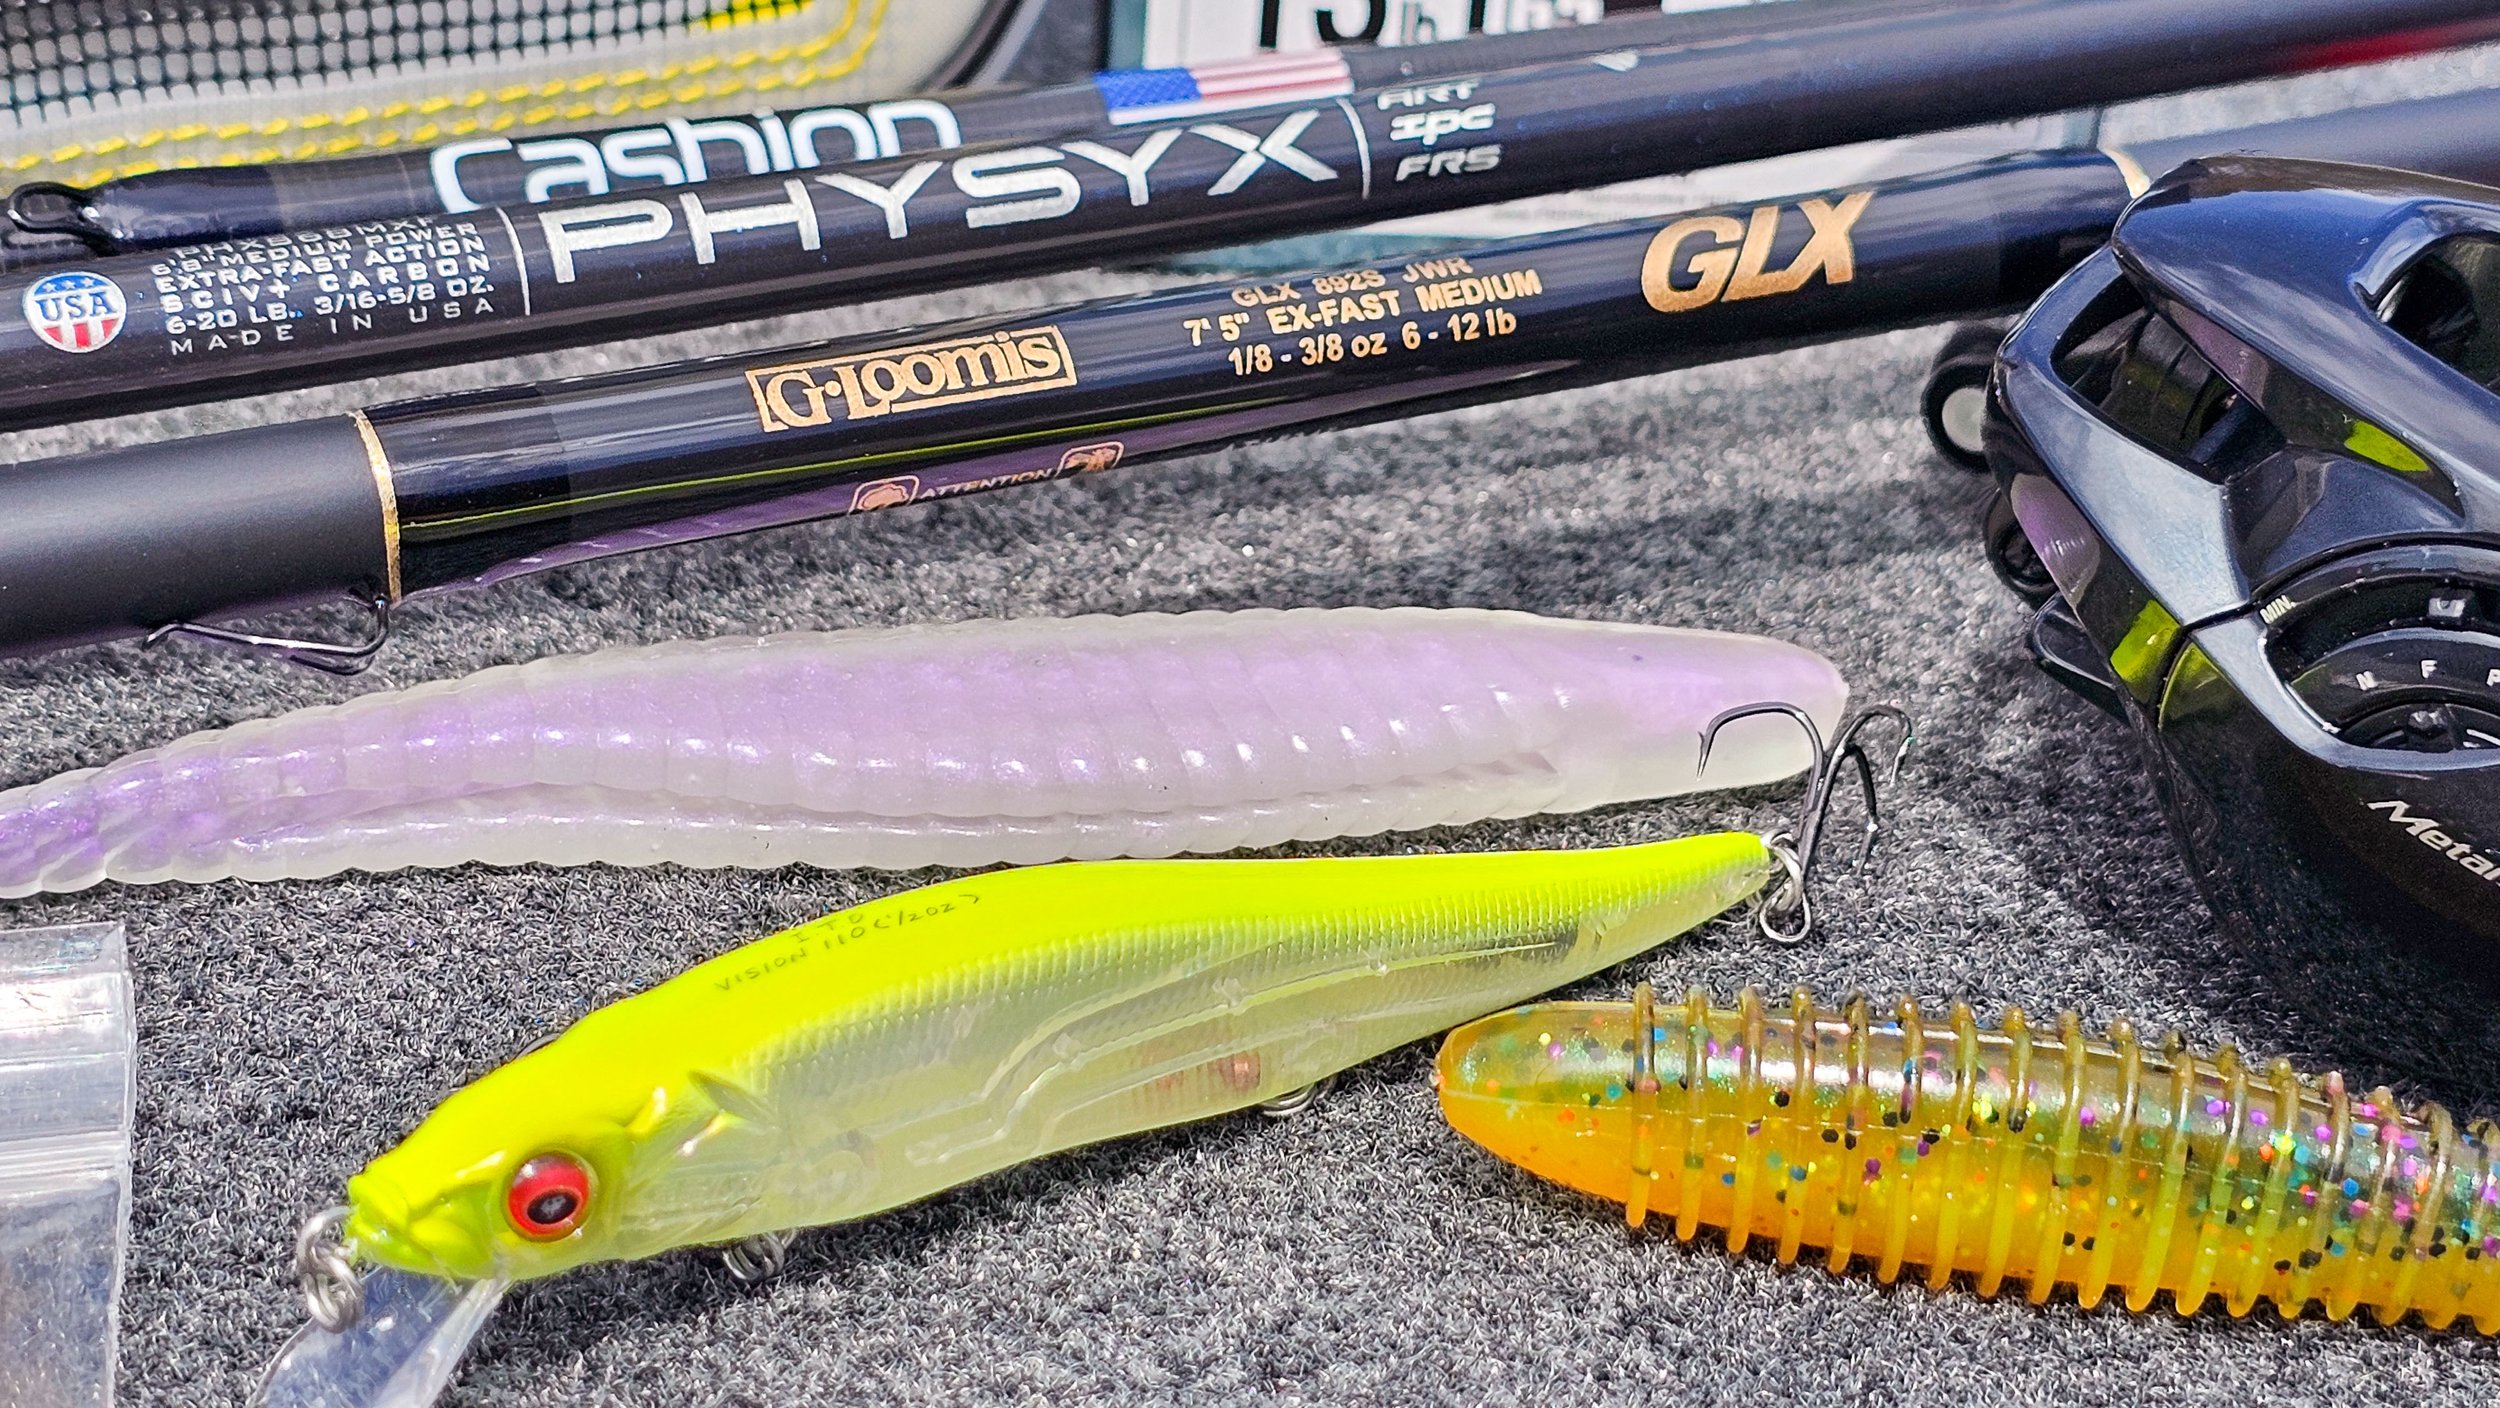 Spring Gear Review! New GLX, Metanium DC 70, Physyx, BFS, and